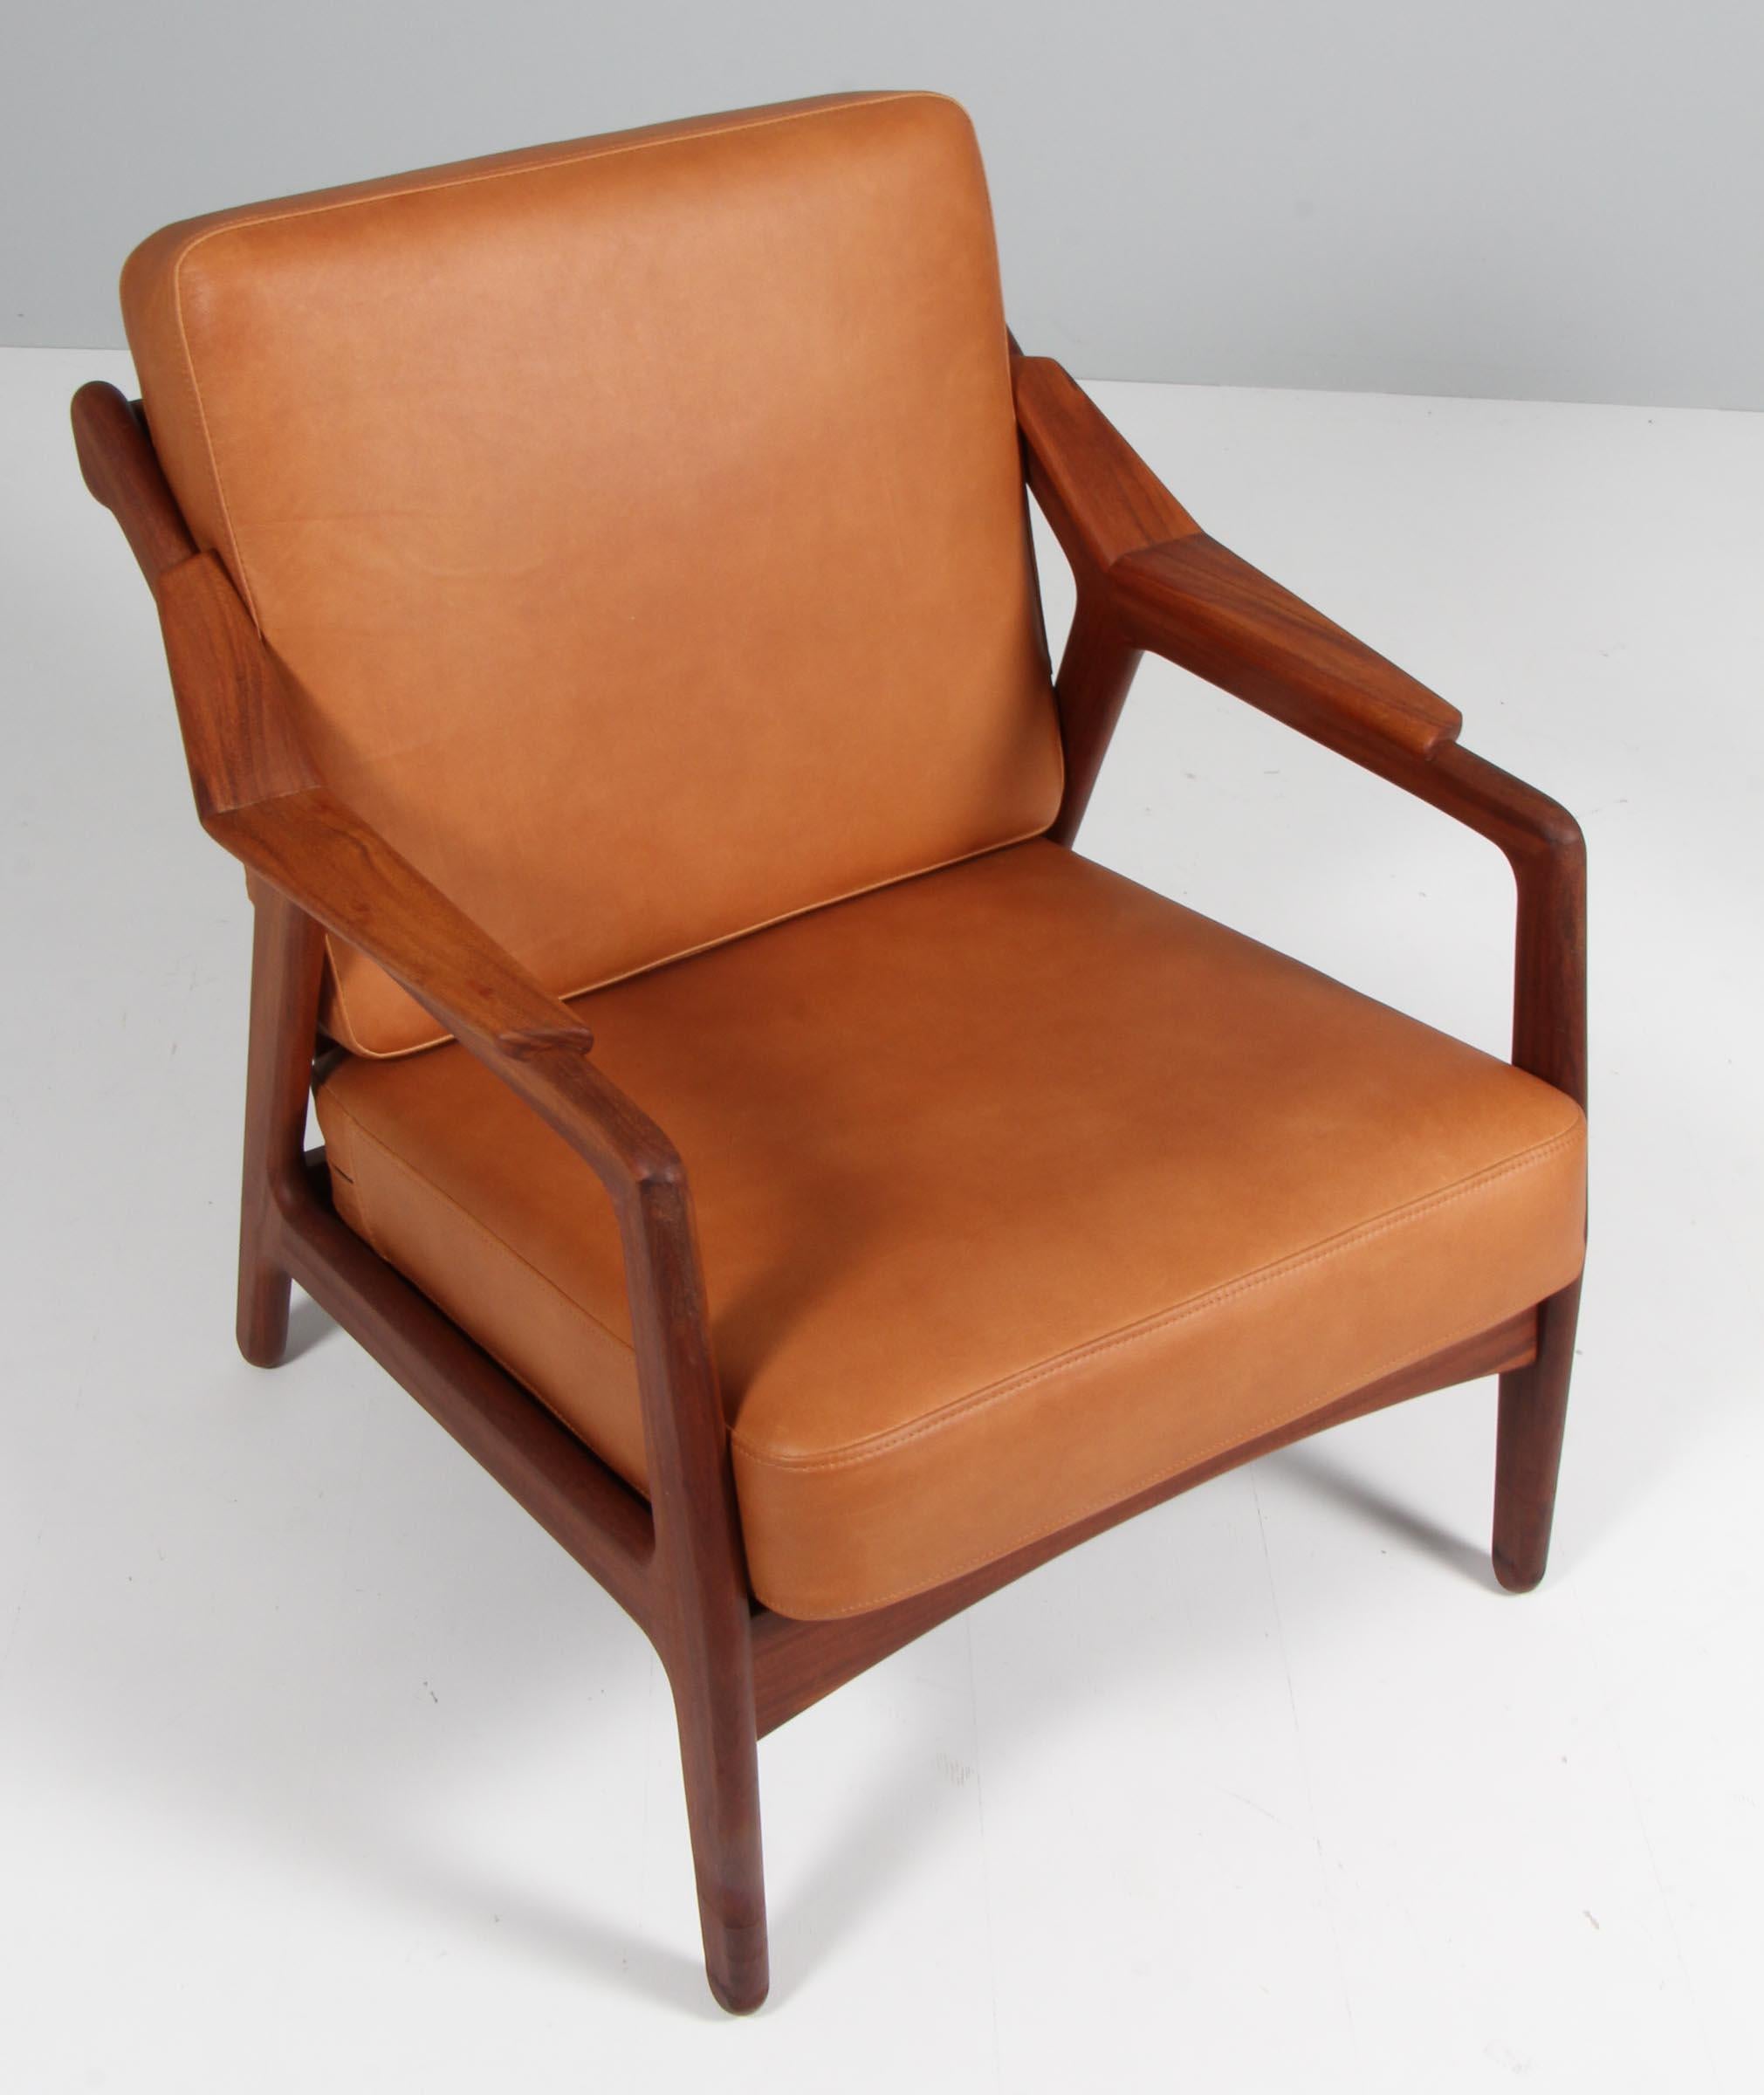 H. Brockmann Petersen lounge chair with frame of solid teak.

New upholstered with vintage tan aniline leather.

